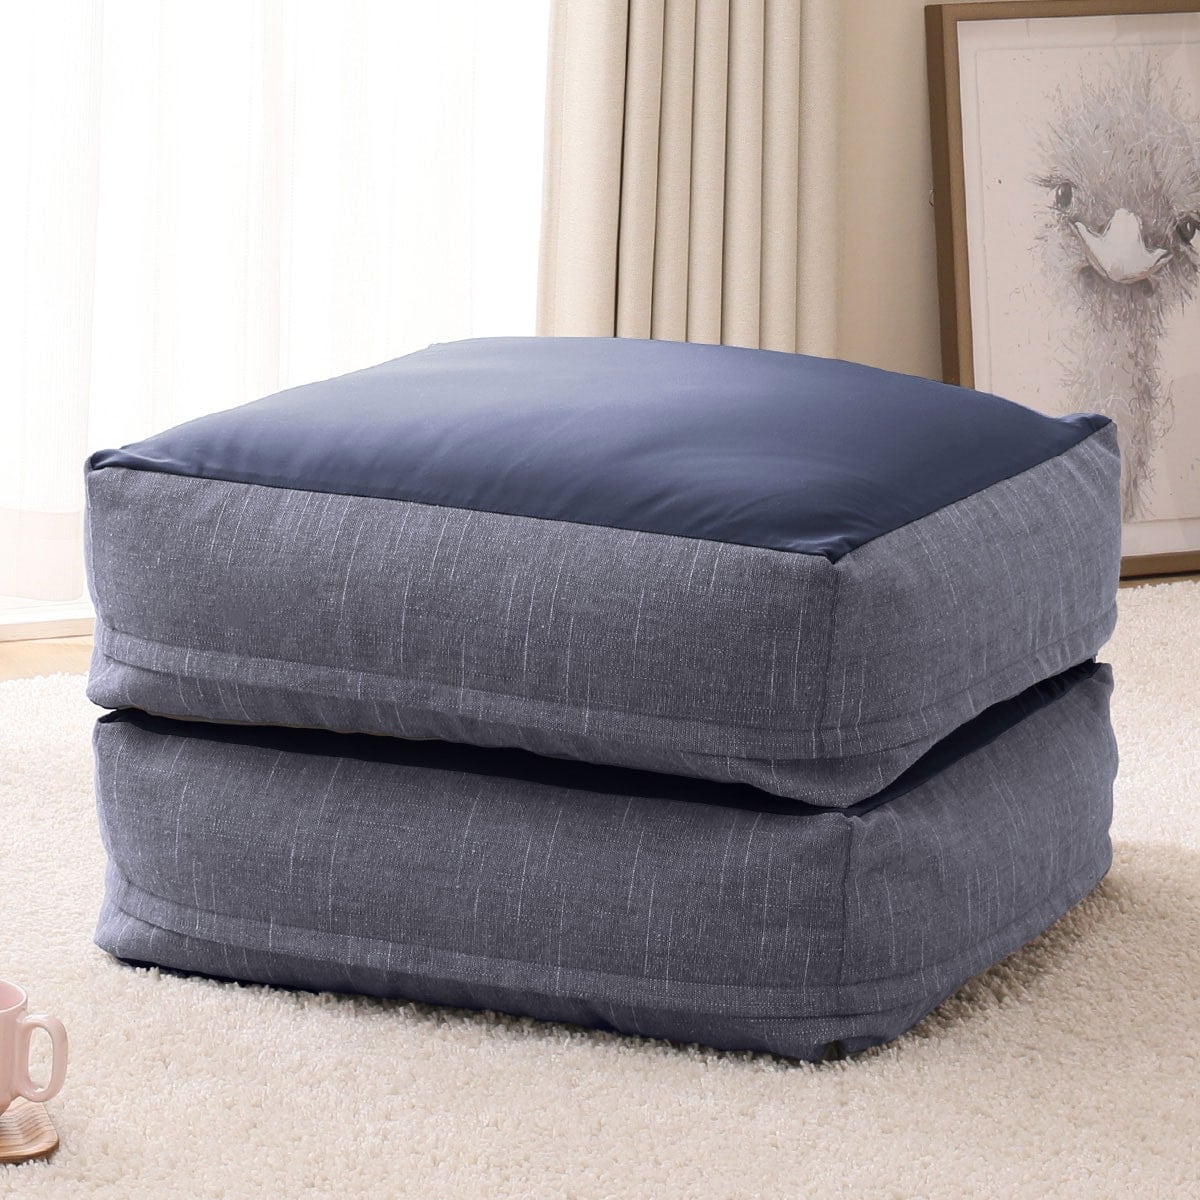  various . how to use . possible to enjoy beads sofa cushion large ( navy )nitoli